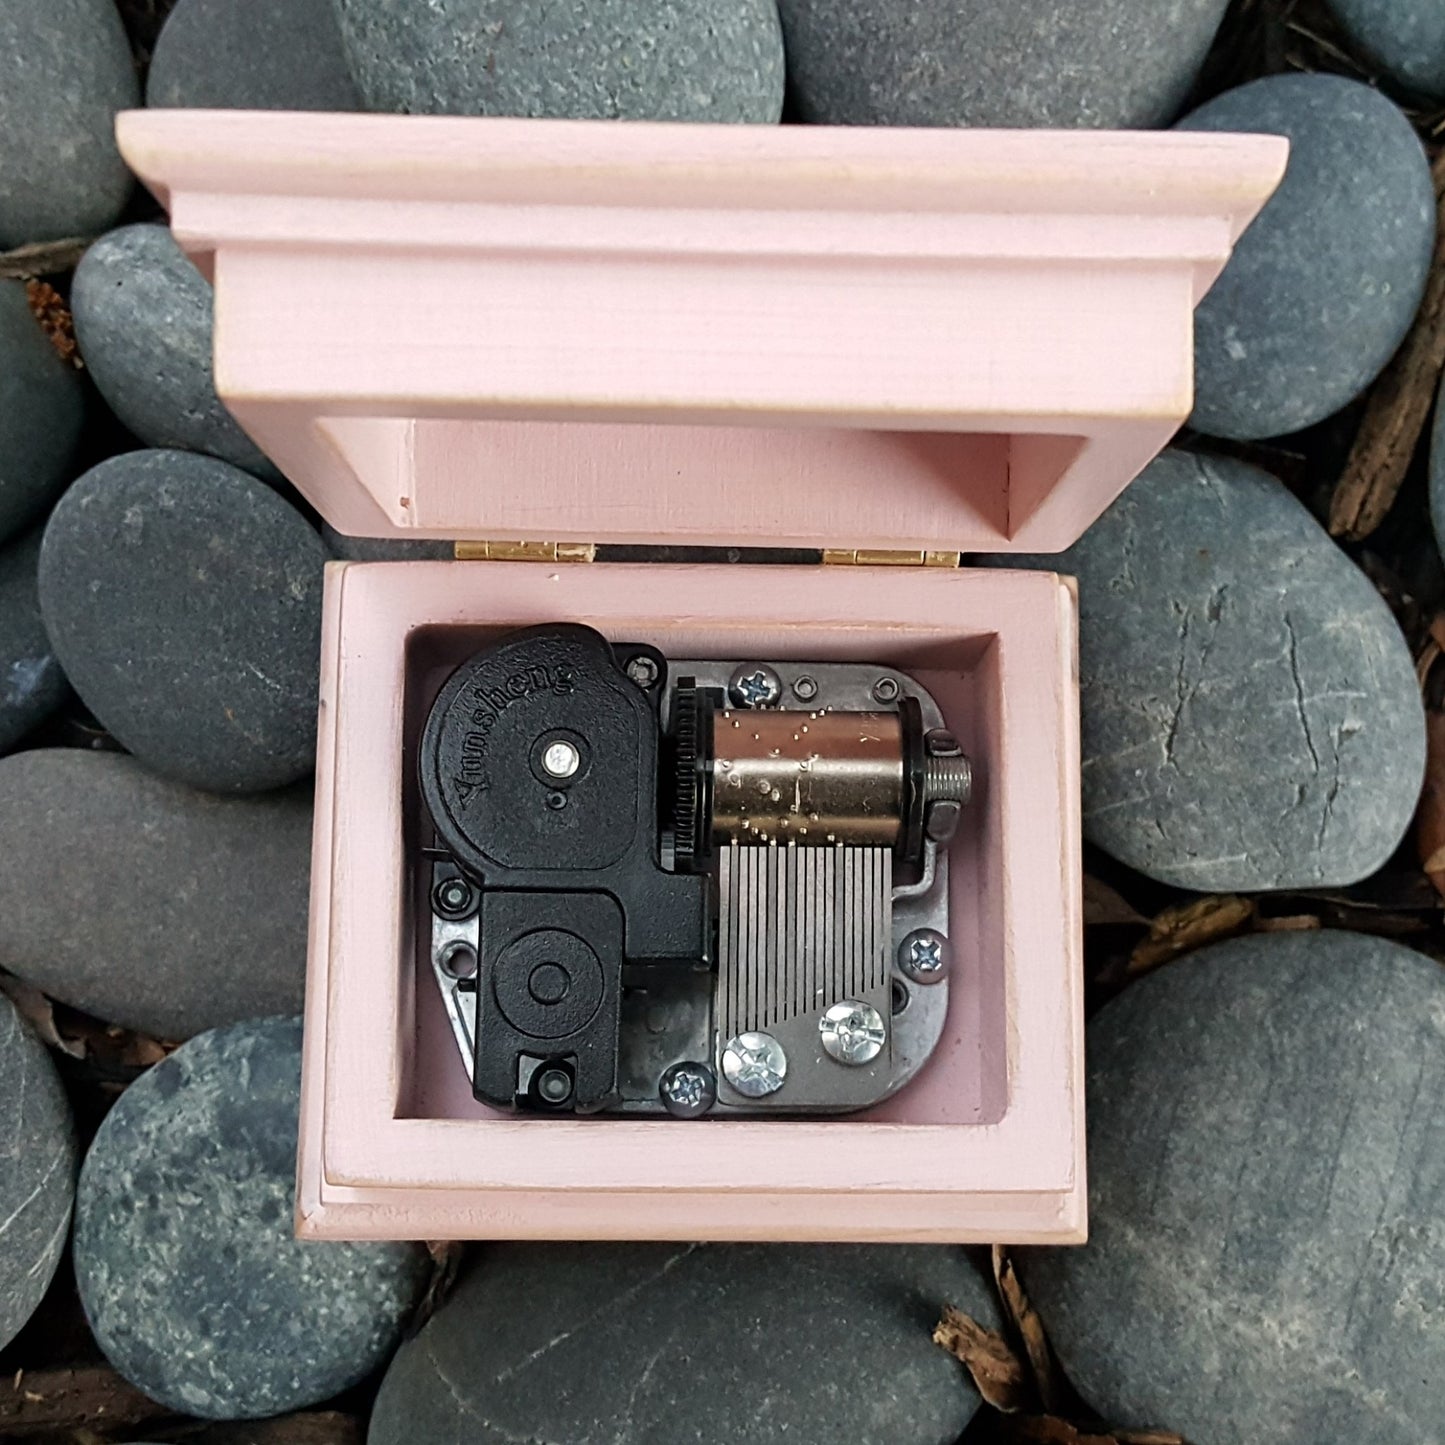 wooden music box in pink showing music box movement built inside, custom-made, choose color and song